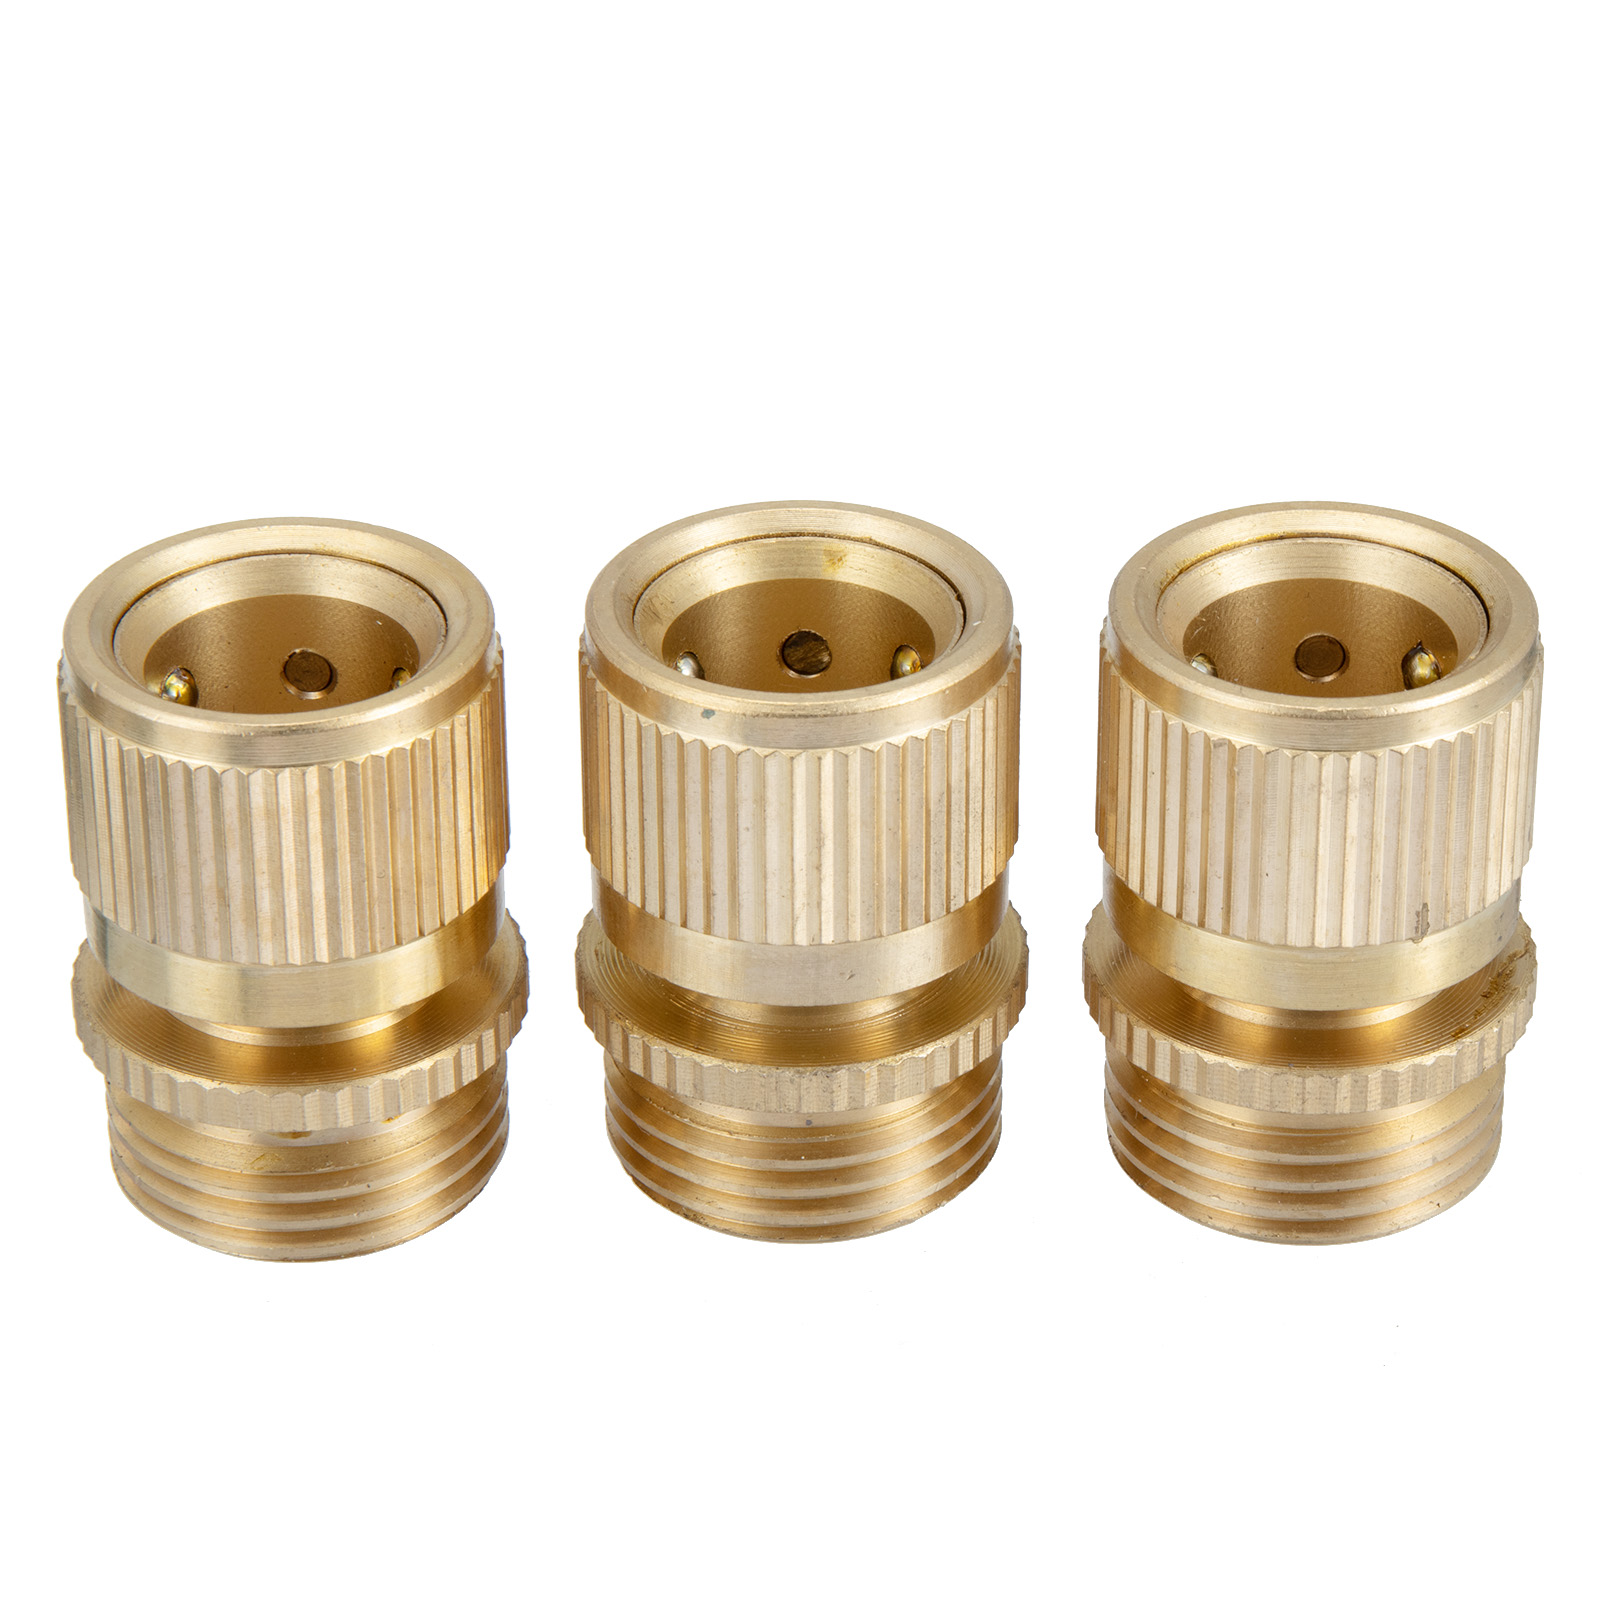 MATCC-Brass-Inner-Teeth-Quick-Connector-Set-34quot-GHT-Brass-Garden-Hose-Quick-Connector-With-Washer-1898352-11